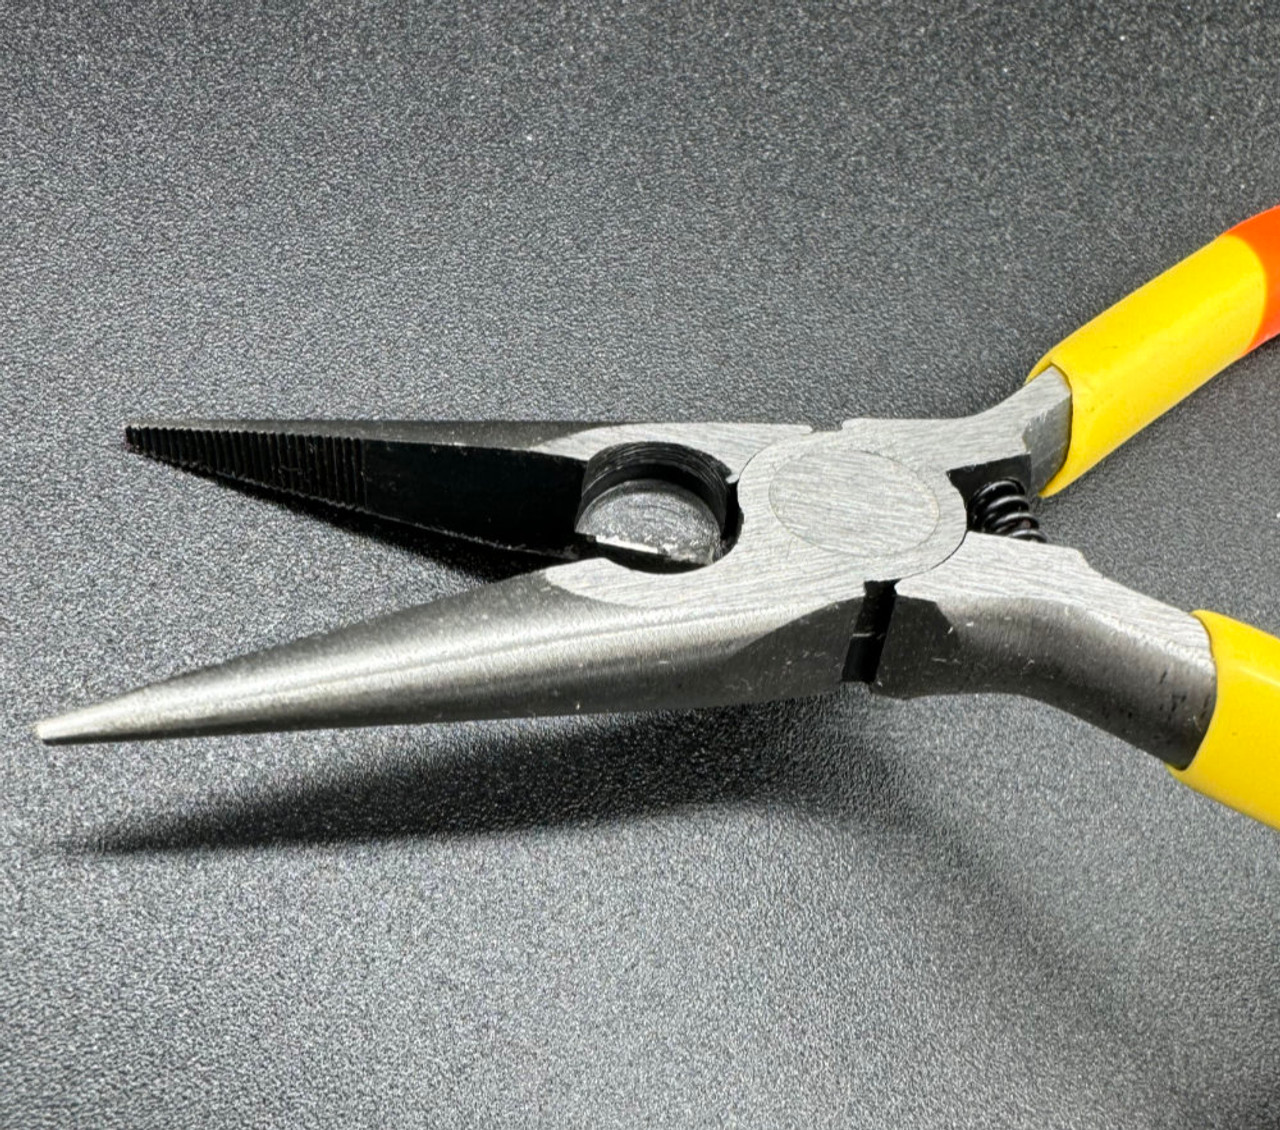 5 INCH MINI LONG NOSE PLIERS (SERRATED JAWS) WITH SIDE CUTTER AND COMFORT GRIP HANDLES